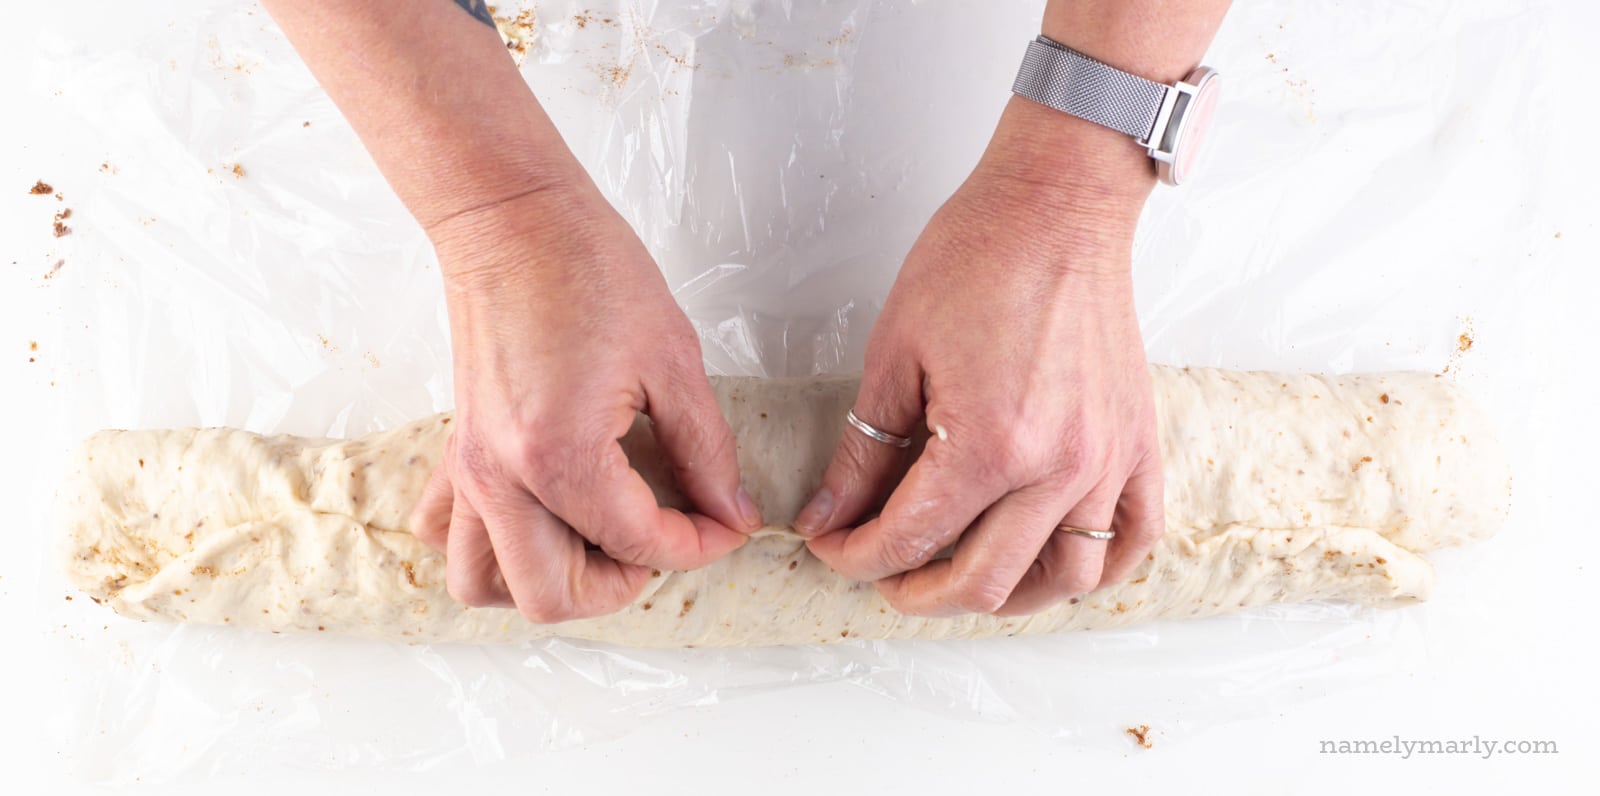 Two hands are pinching a log of dough to create a seam.